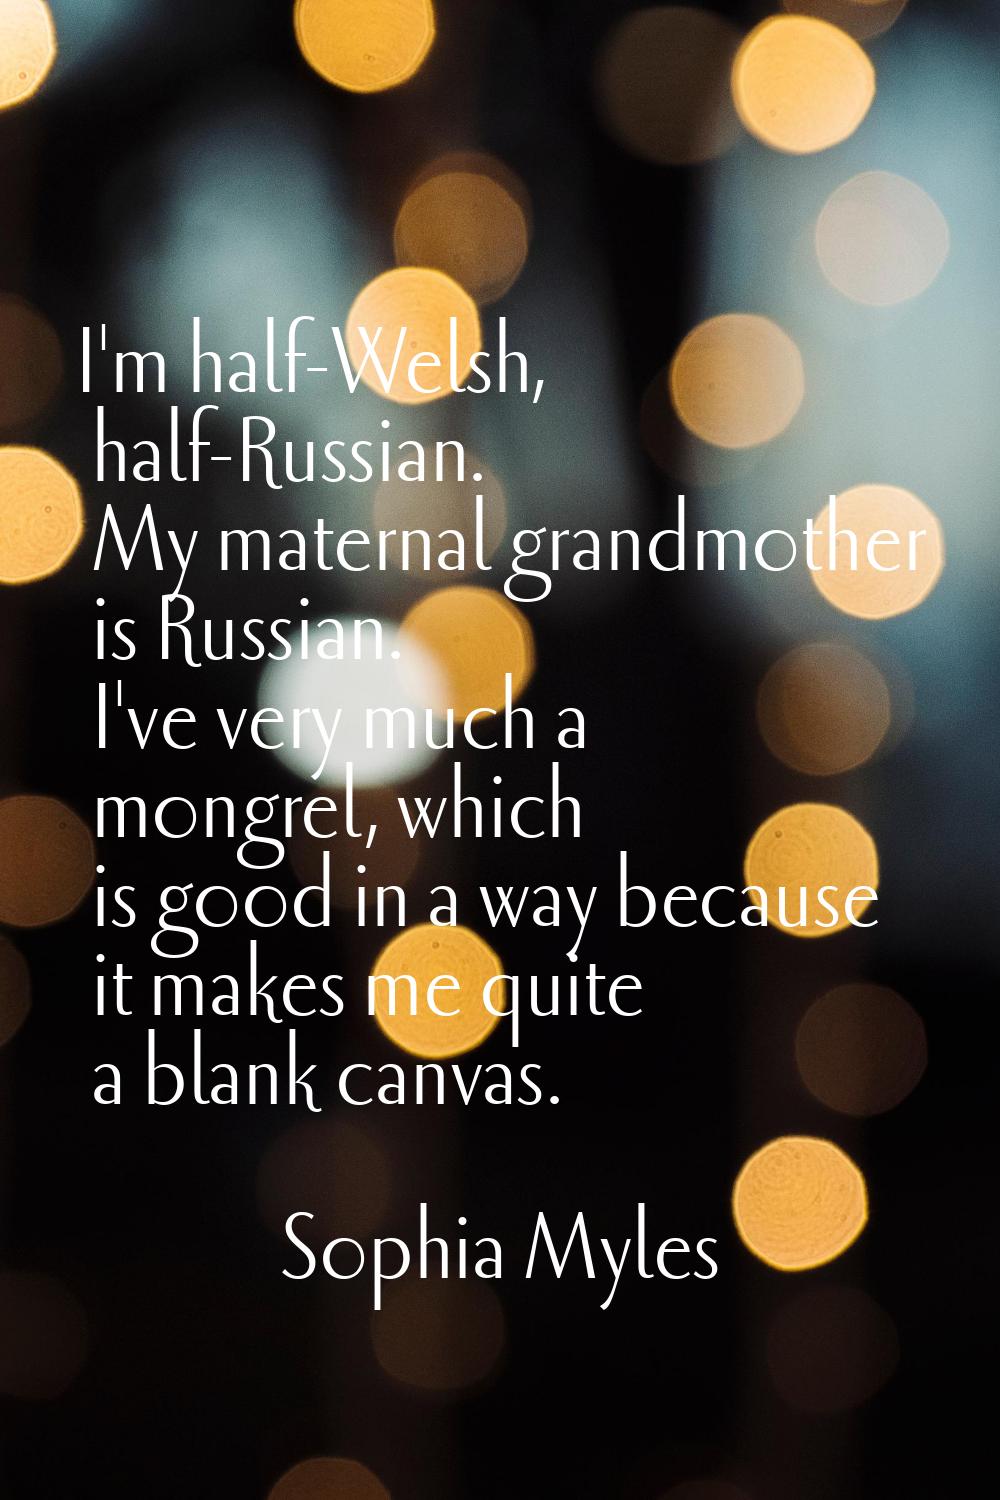 I'm half-Welsh, half-Russian. My maternal grandmother is Russian. I've very much a mongrel, which i